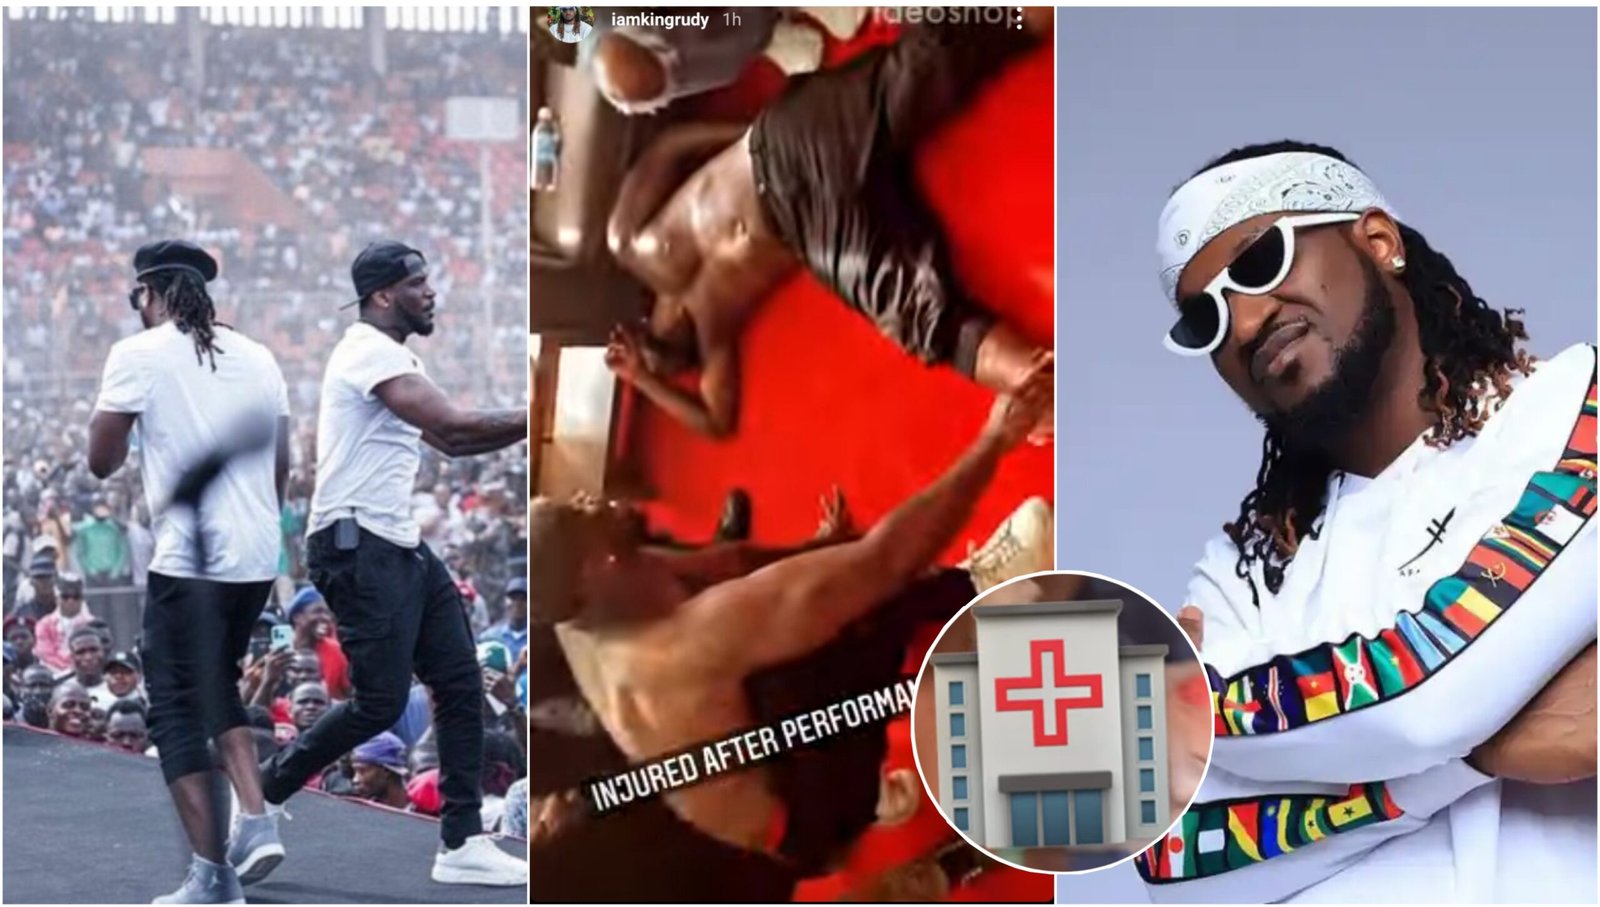 Rudeboy of P-square hospitalized after performing in Liberia (Video)